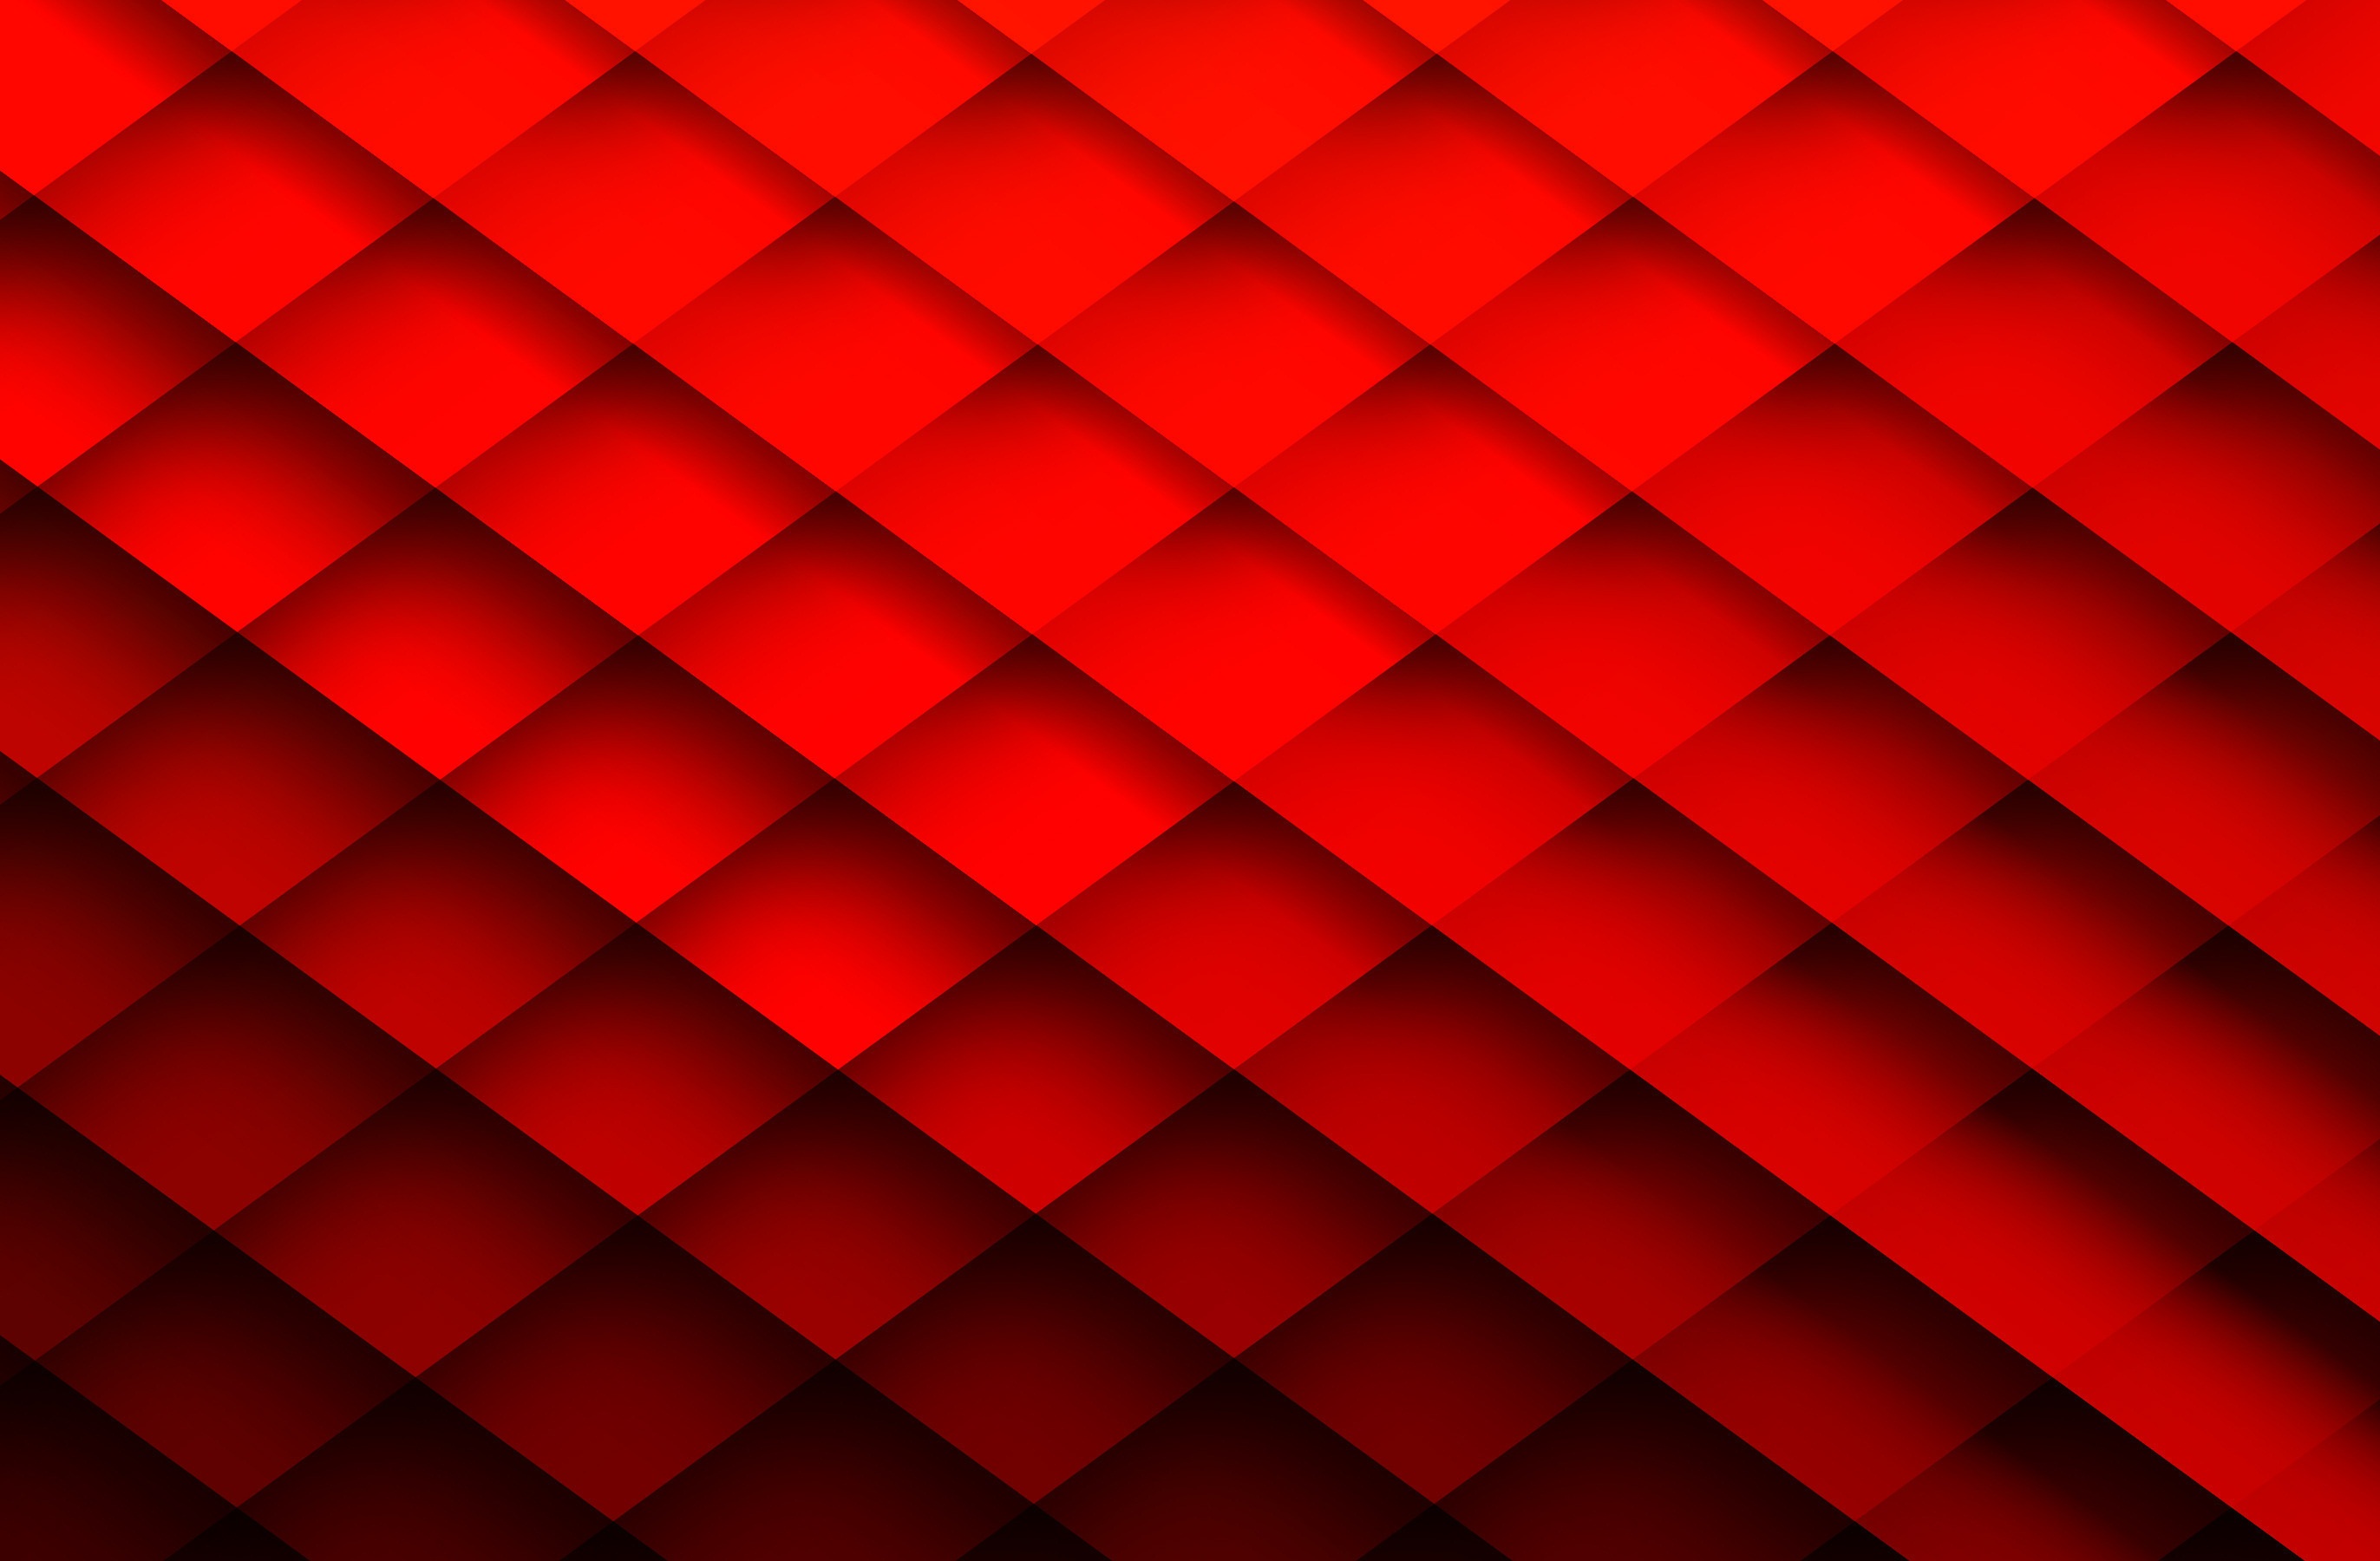 Red Abstract Backgrounds Related Keywords amp Suggestions